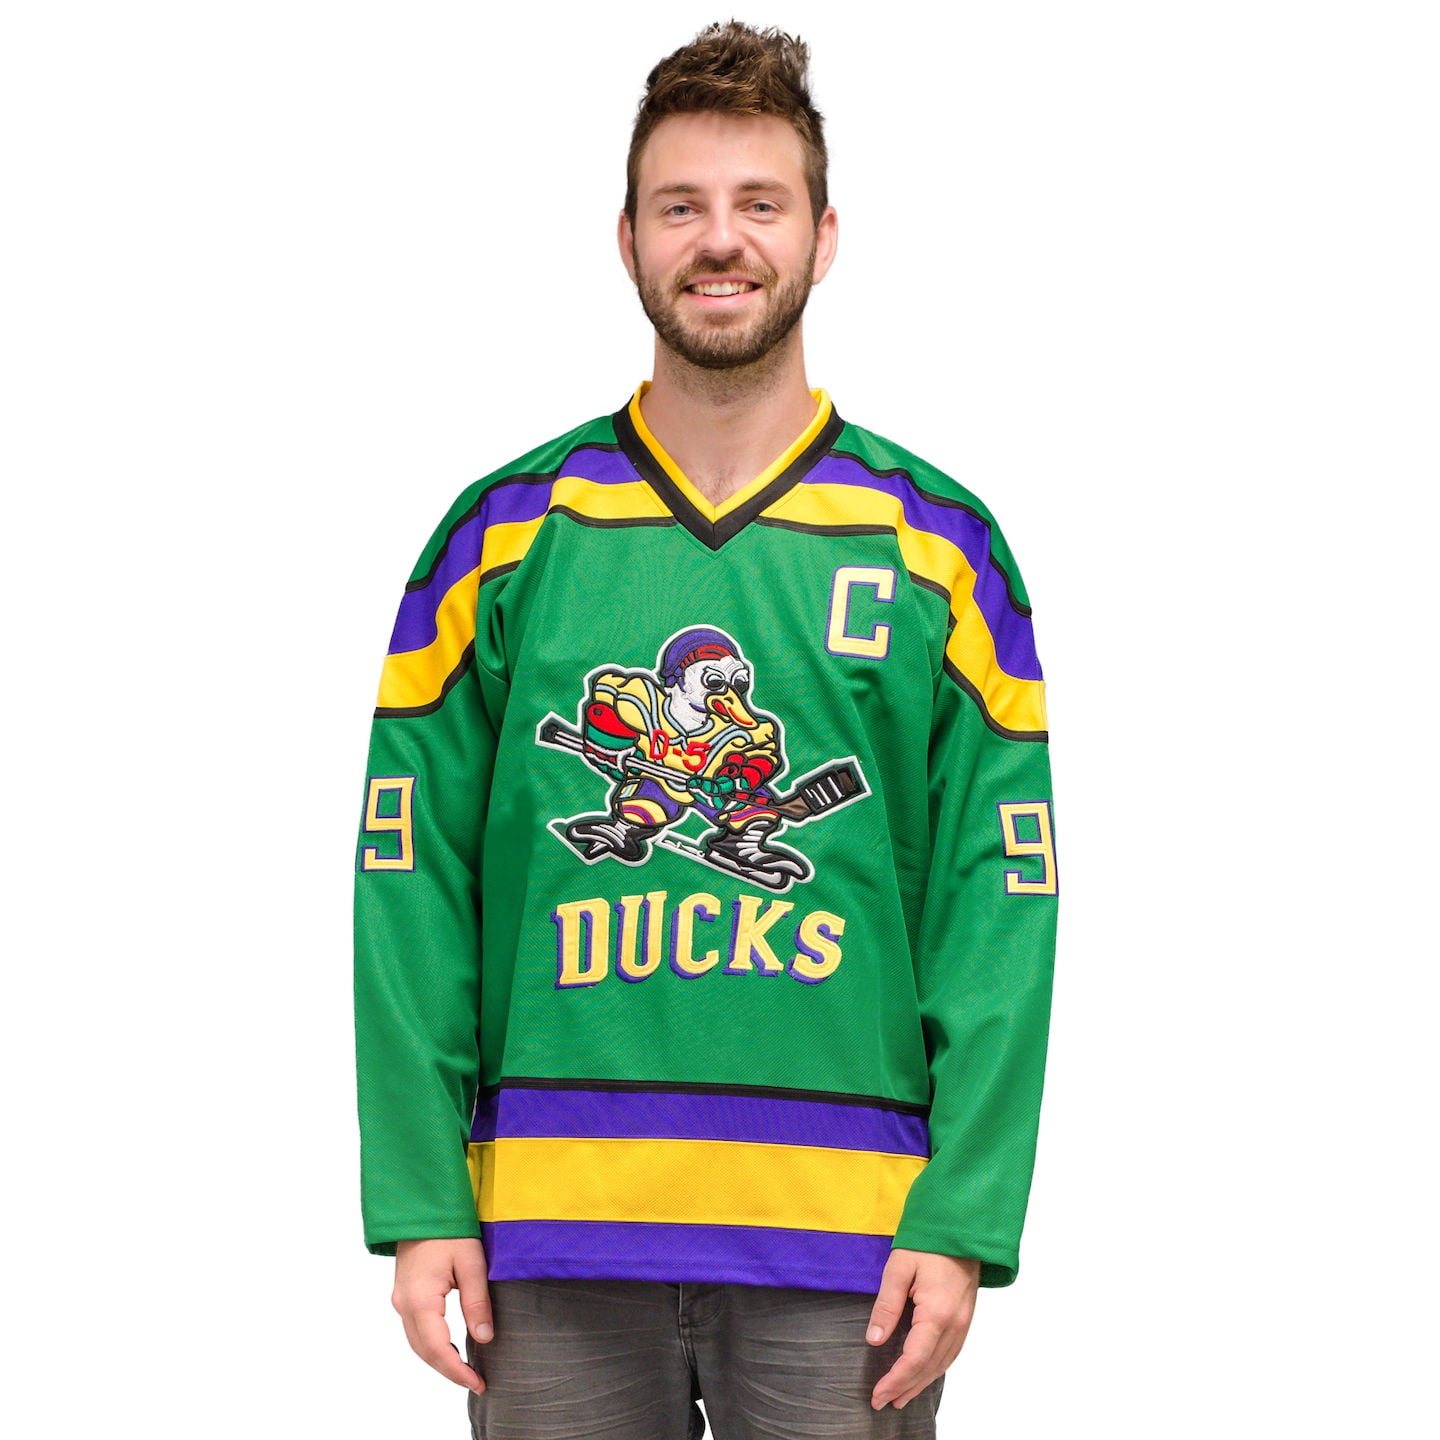  D-5 Youth Mighty Ducks Jersey #96 Conway #99 Banks